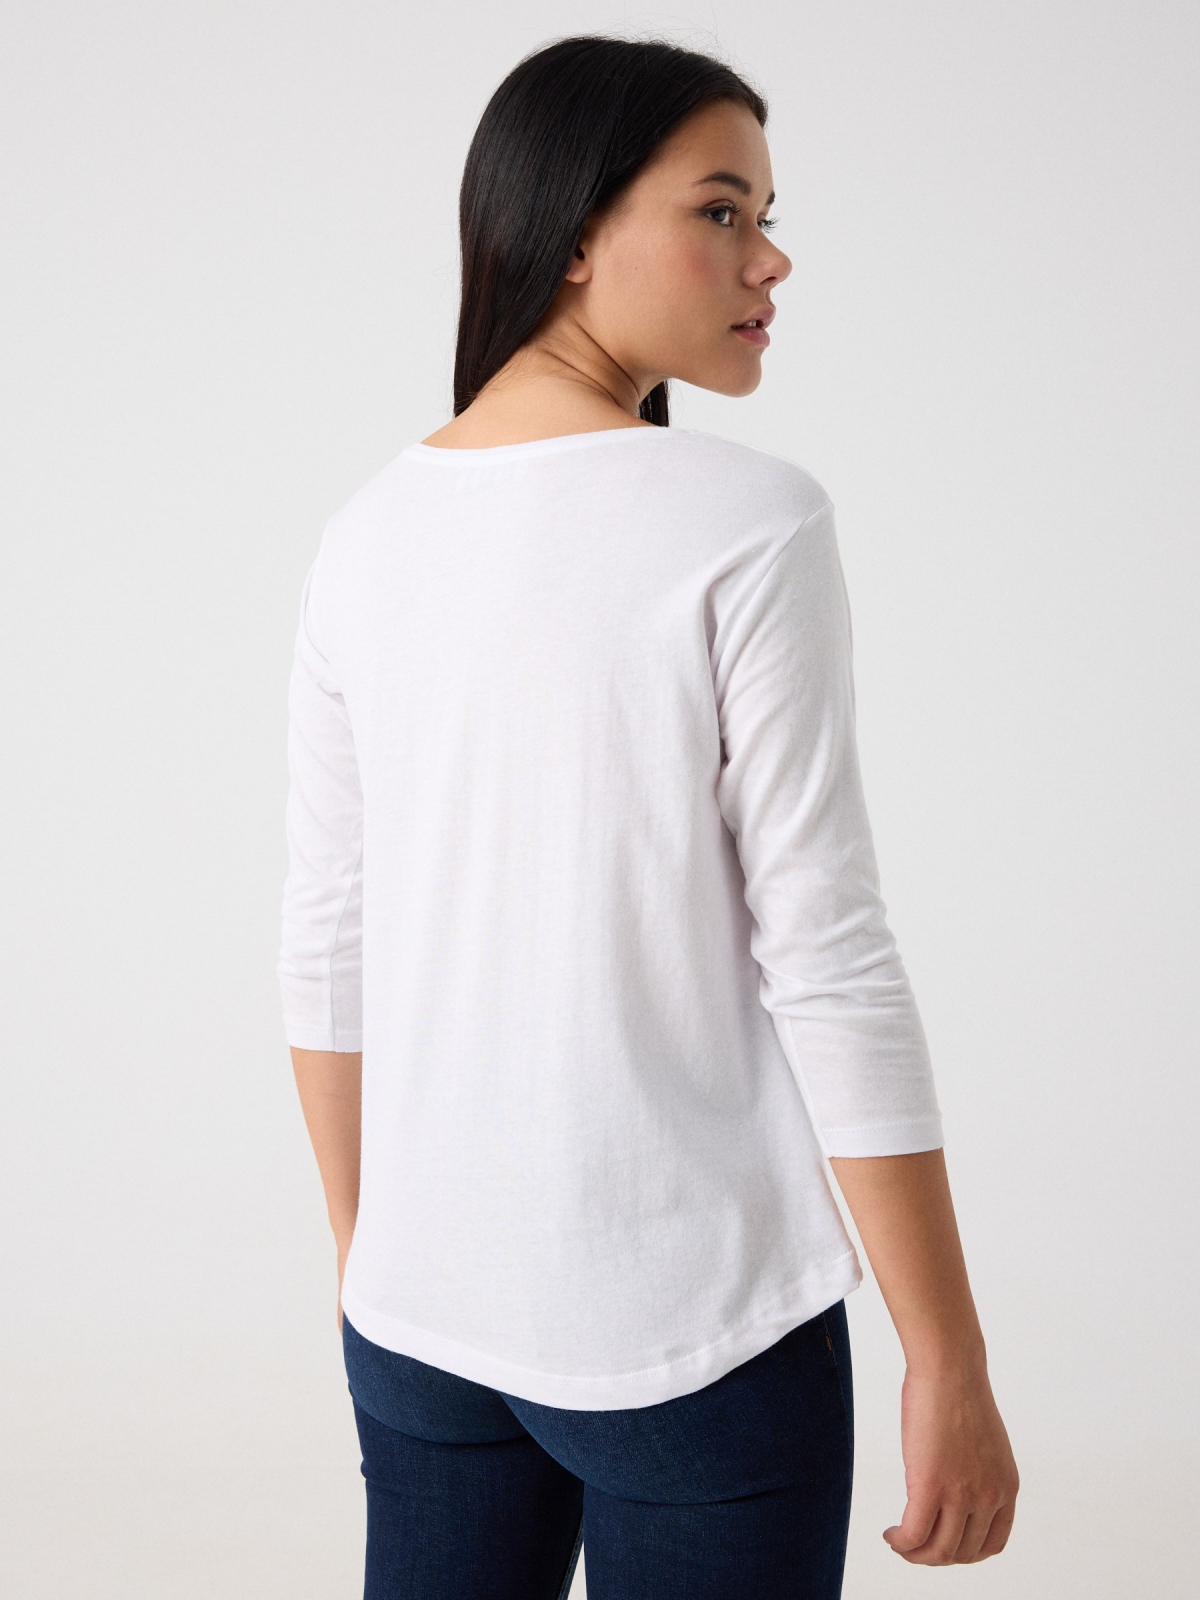 White 3/4 sleeve t-shirt white middle back view